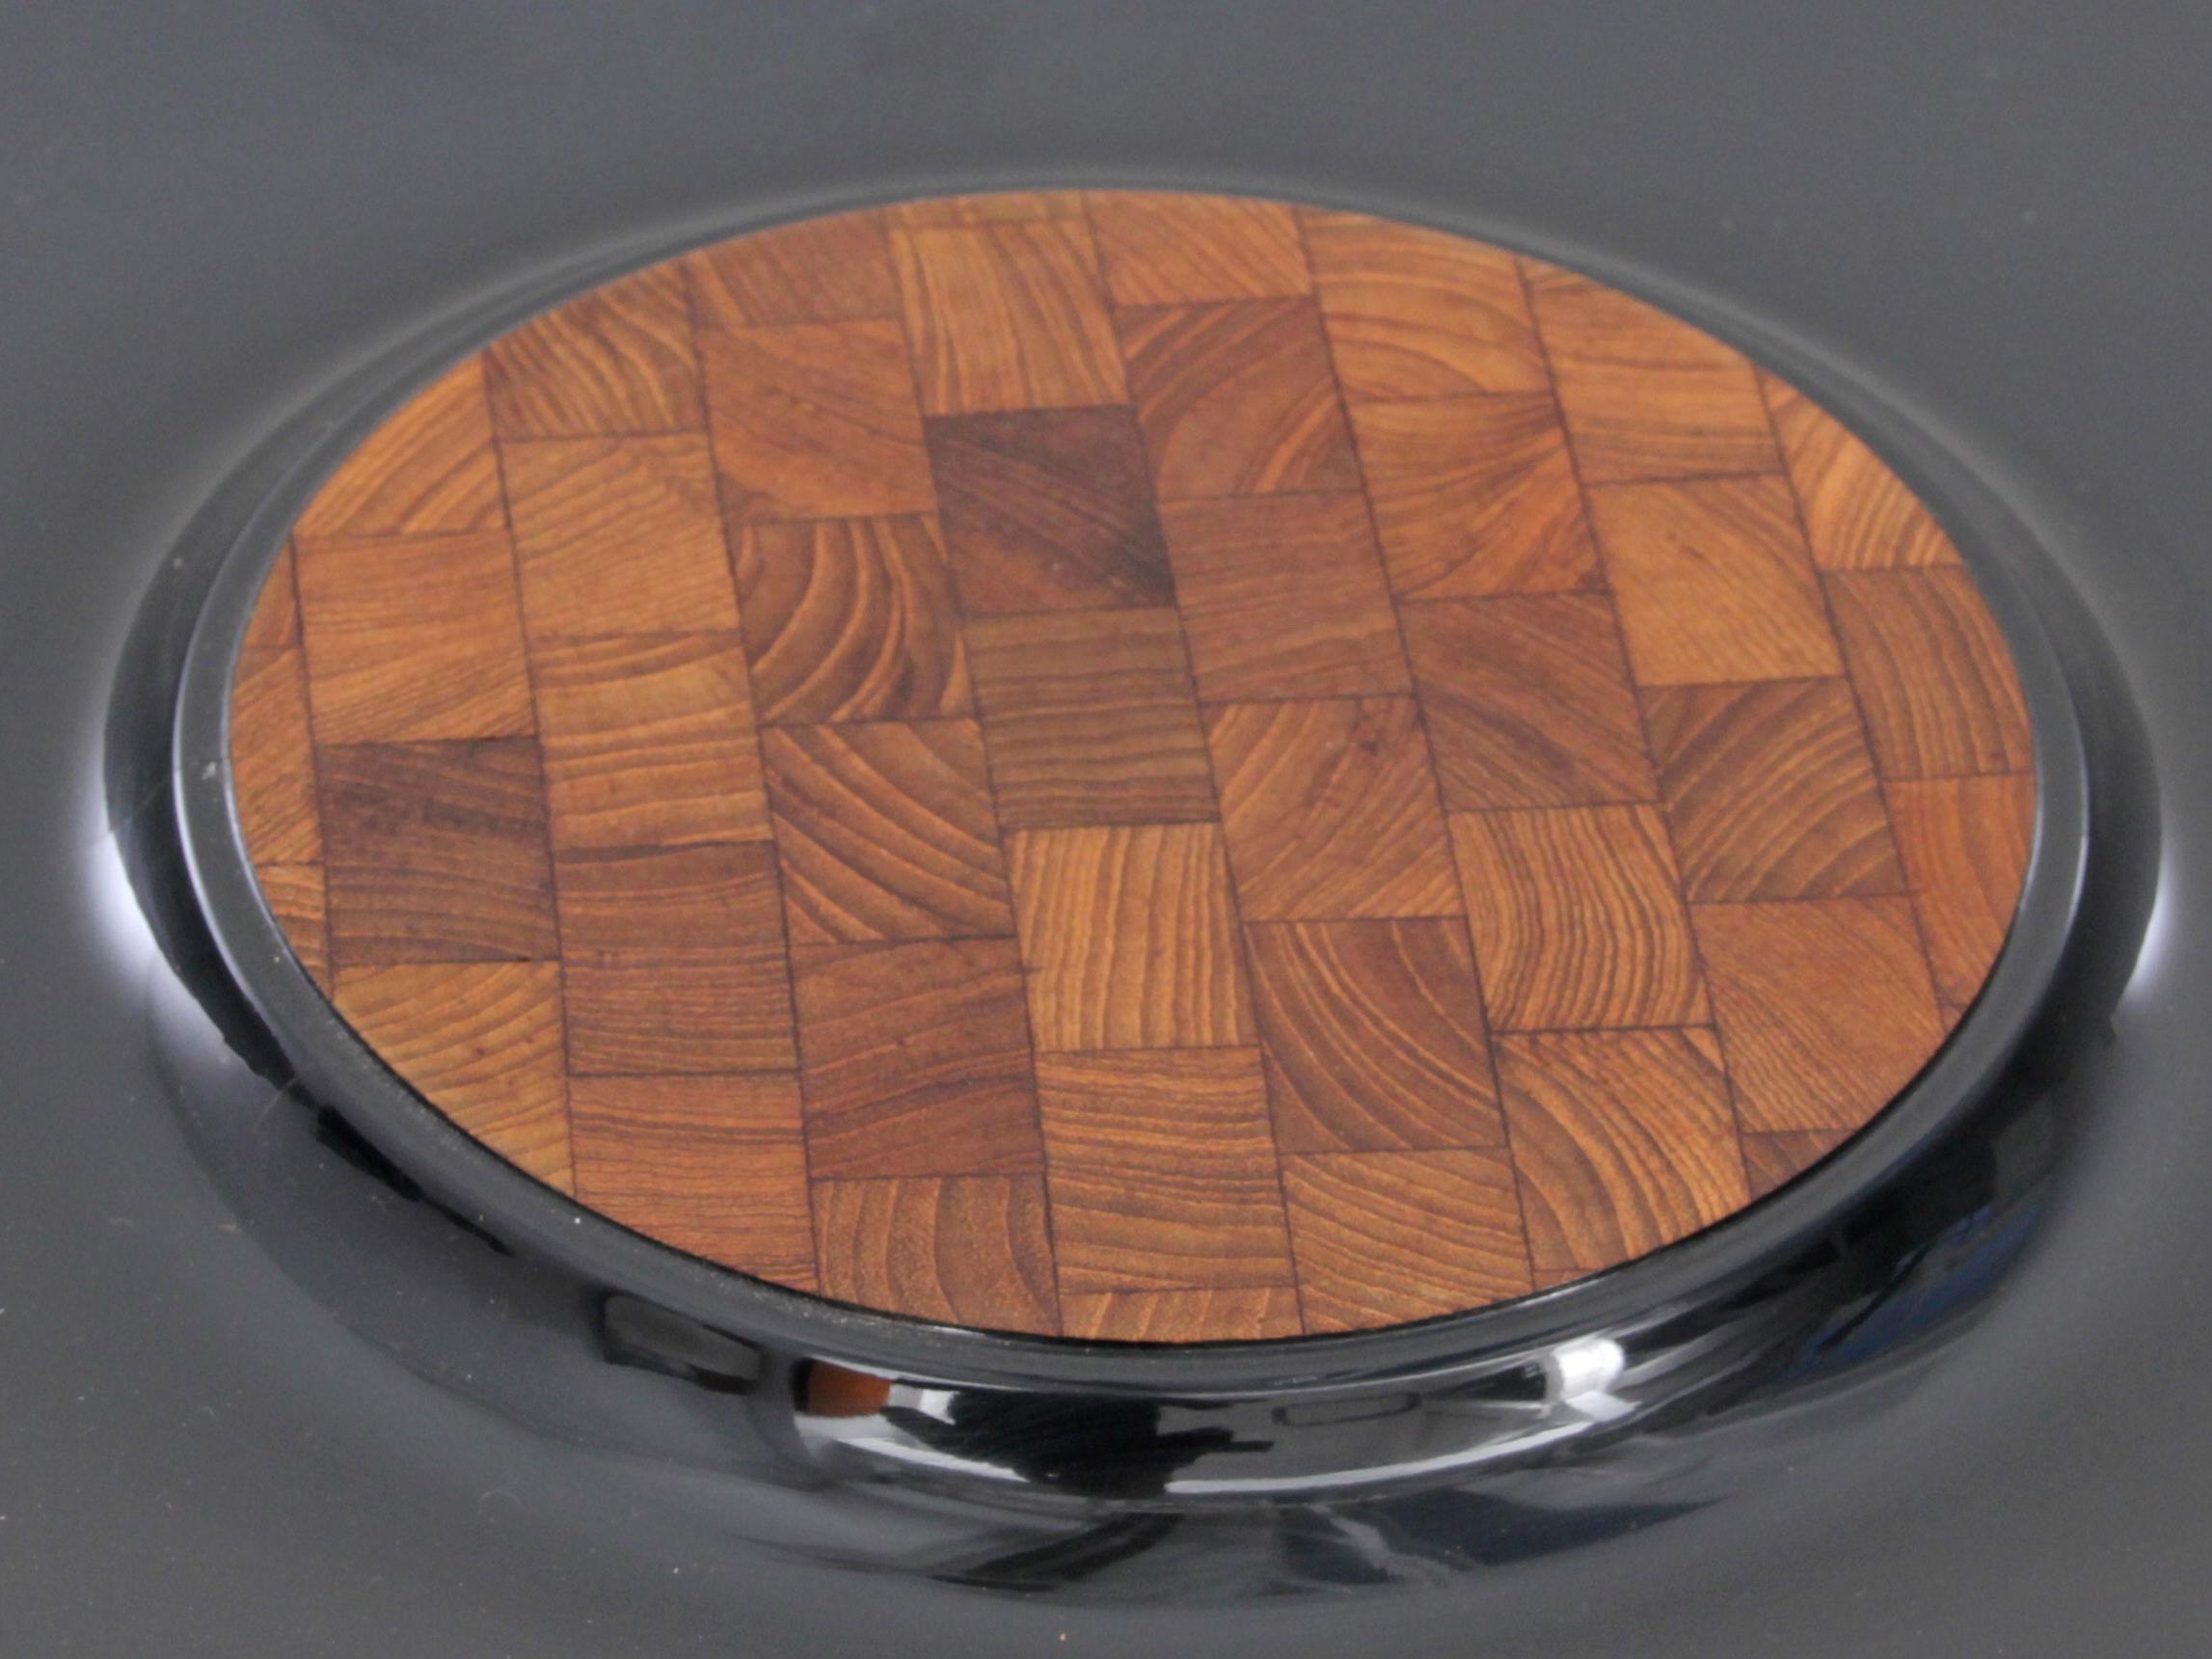 Scandinavian tray by Jens Quistgaard for Dansk International Designs. Black lacquer and teak wood marquetry. The lacquer is slightly scratched. One small crackling.